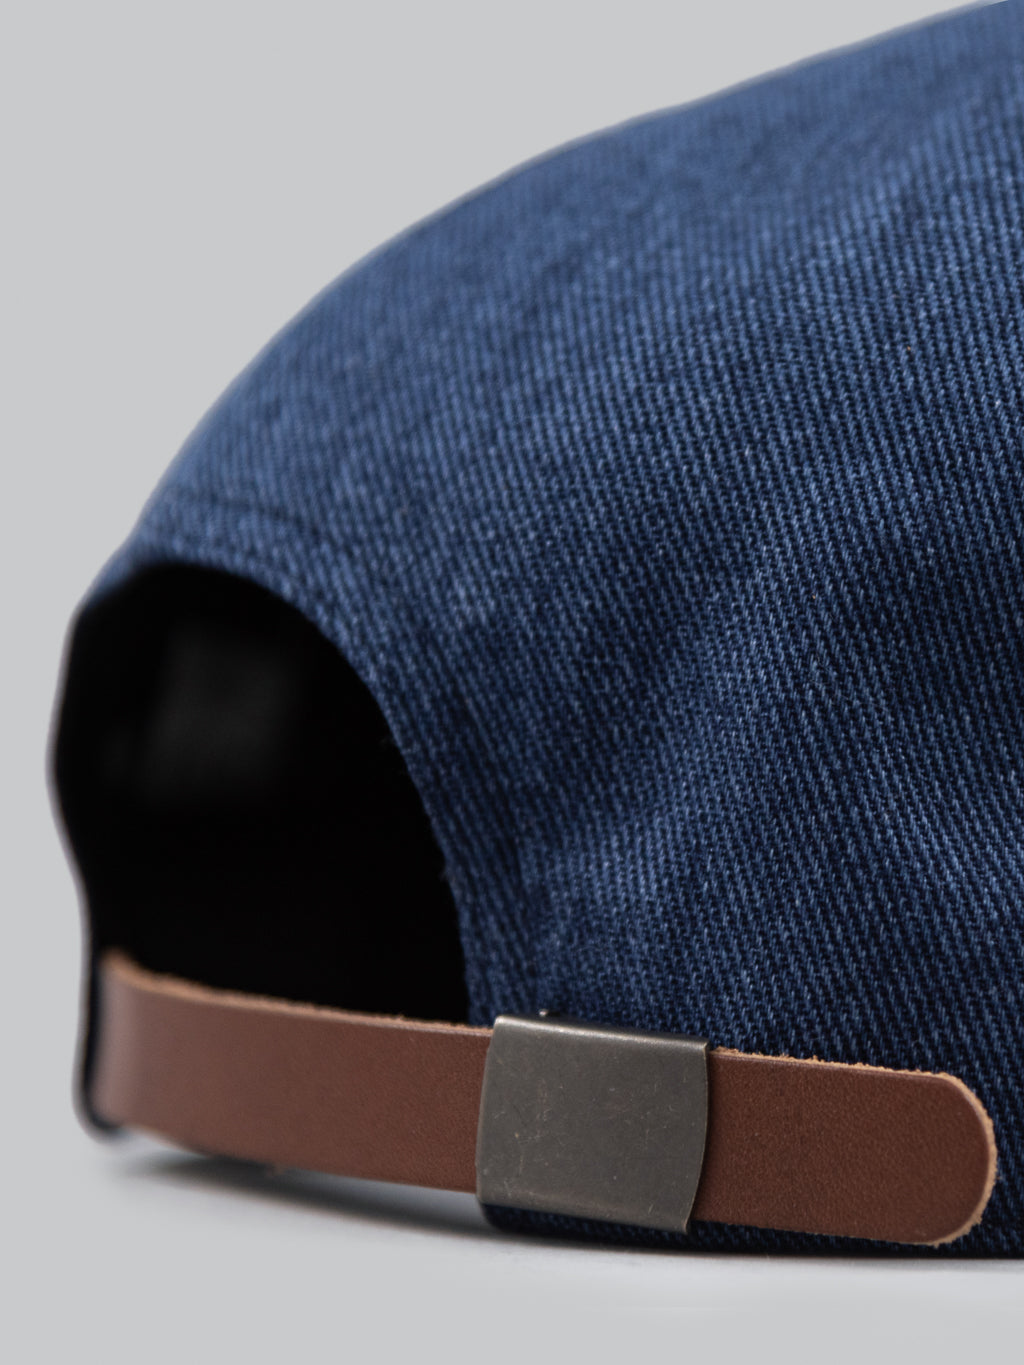 mighty shine flip cap c twill navy leather strap brown